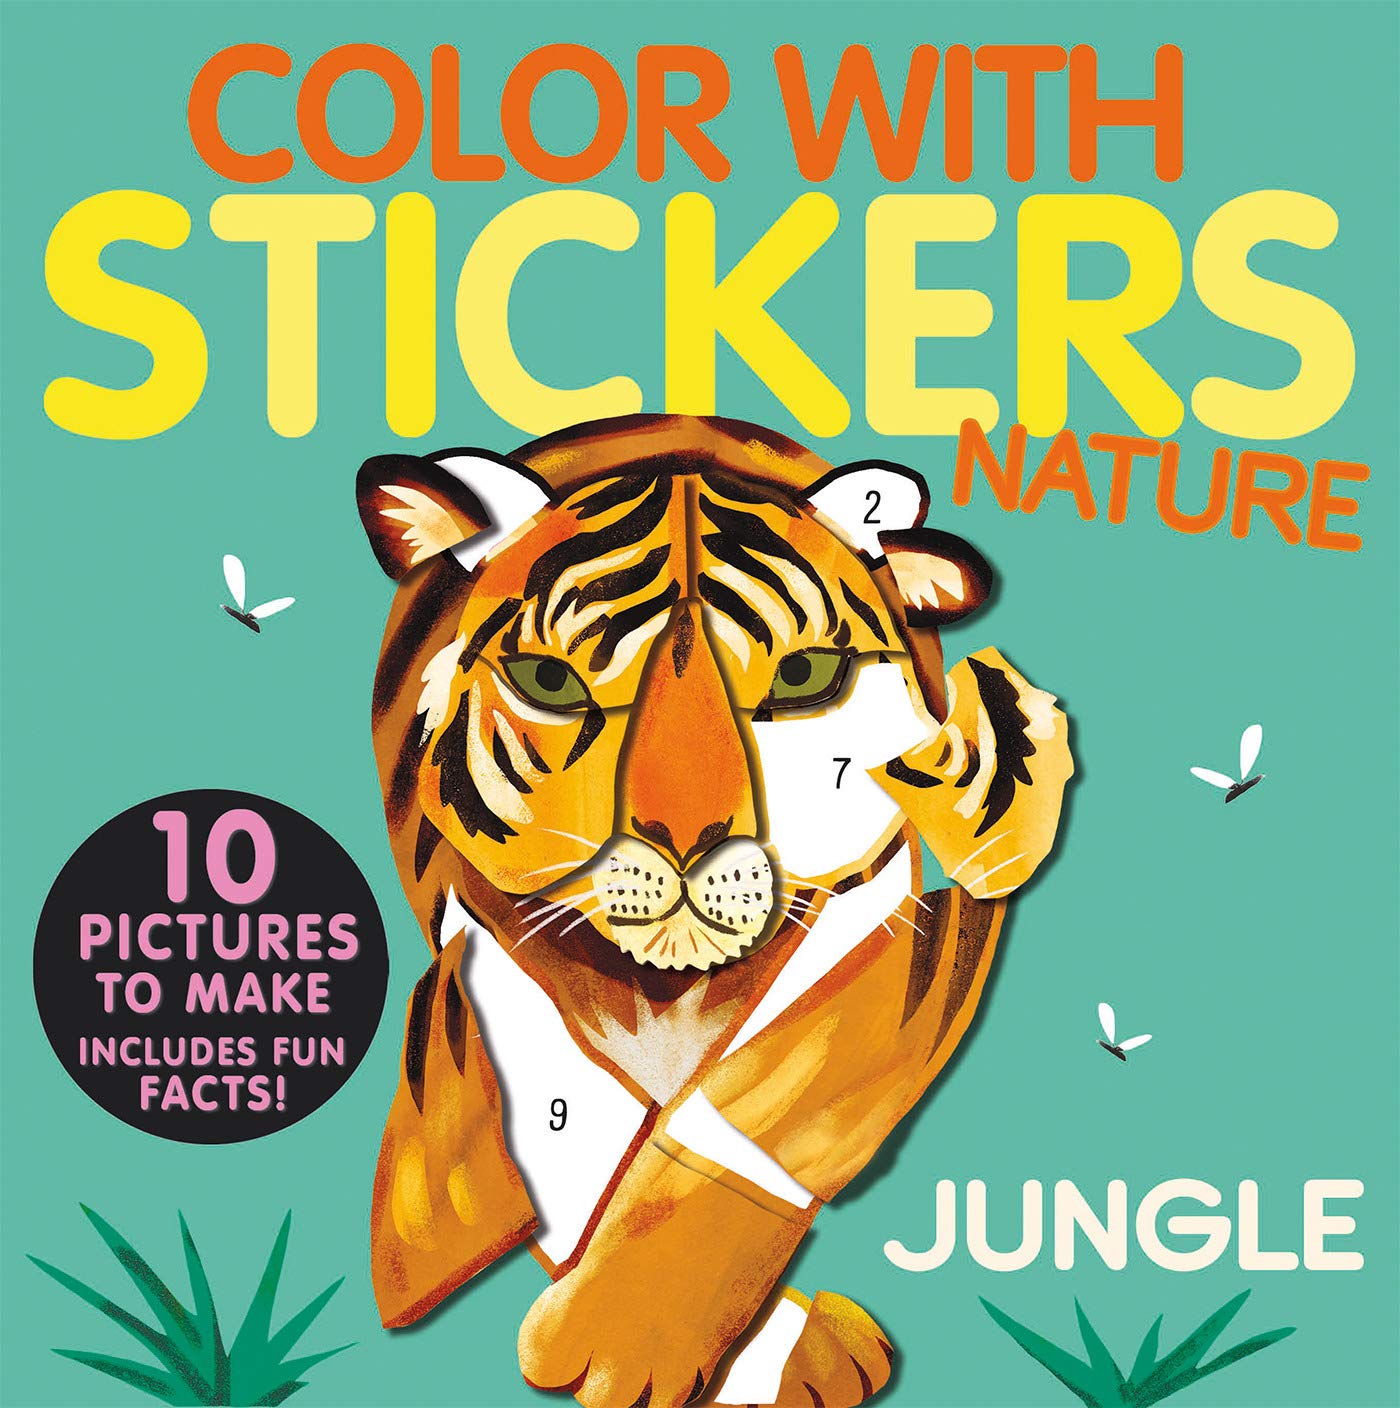 Color with Stickers Nature Jungle